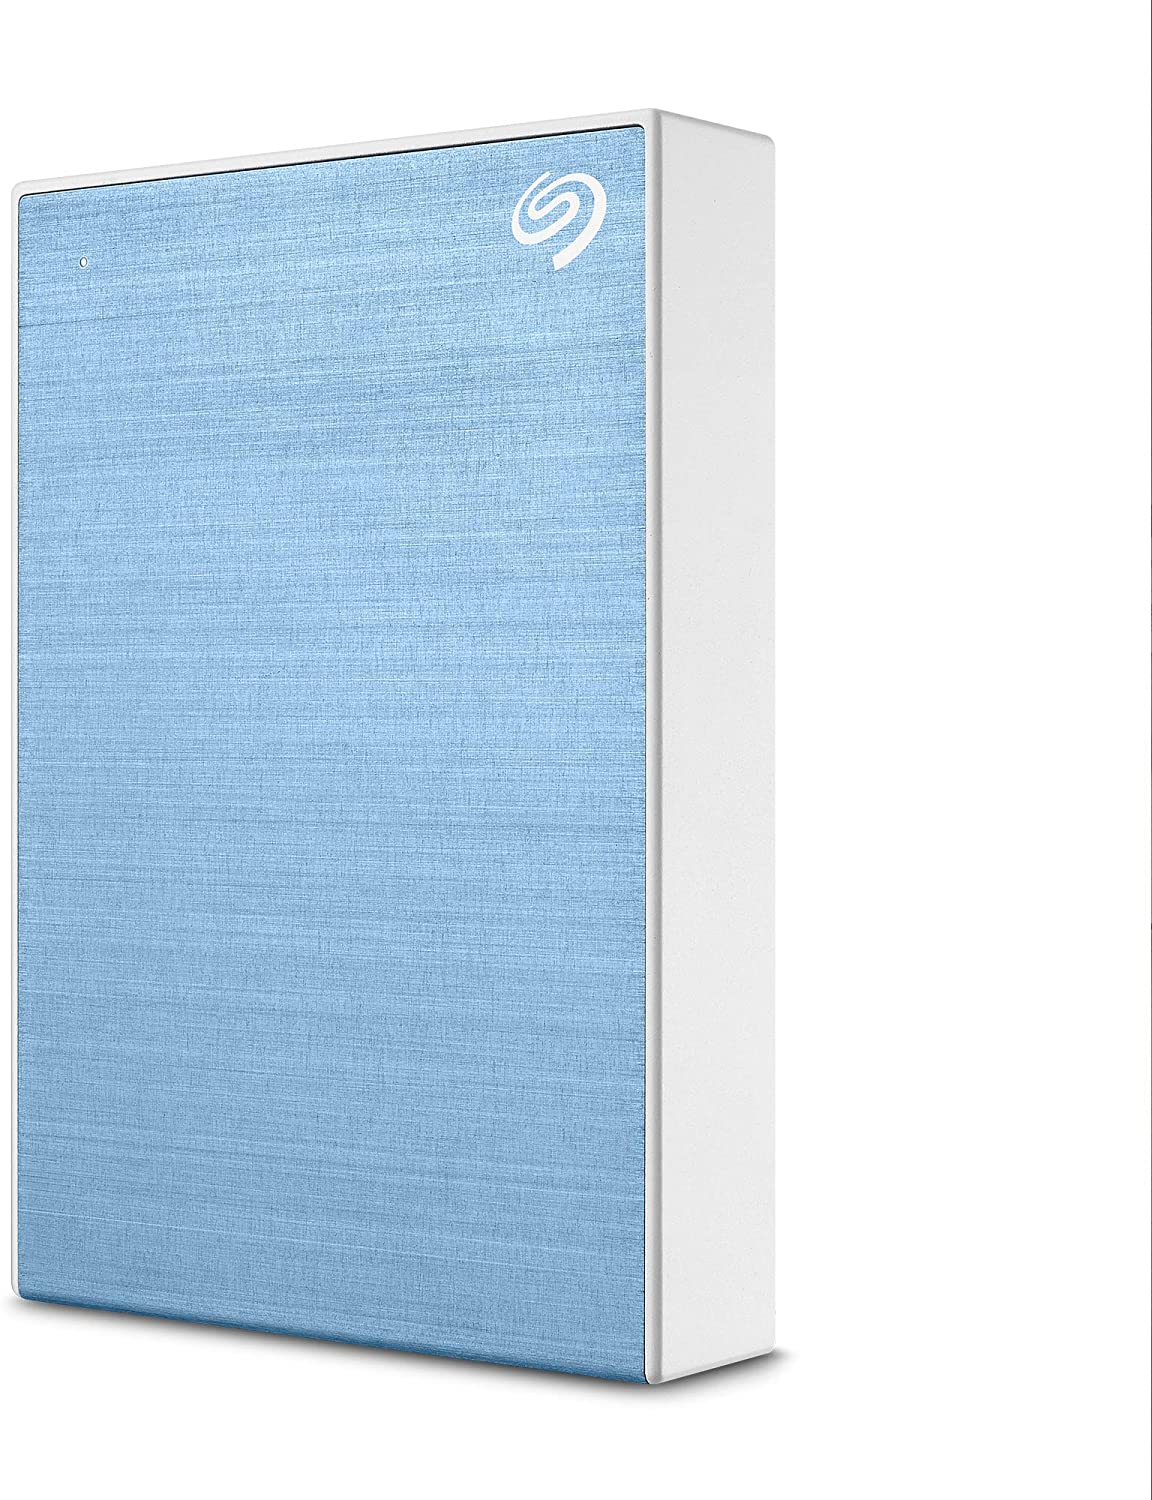 Hard disk extern seagate one touch 4tb usb 3.0 light blue